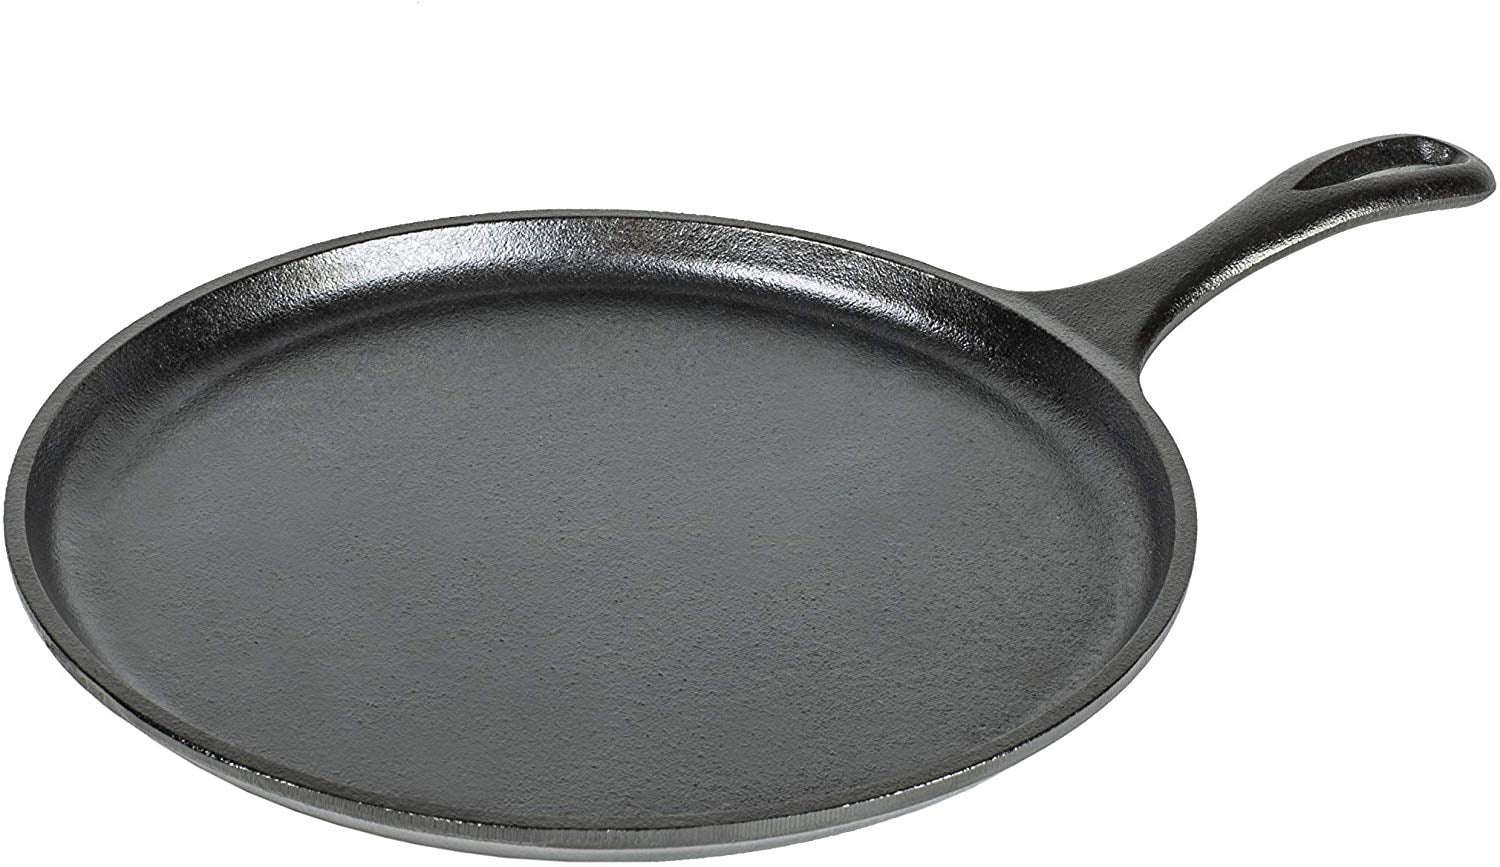 Round Seasoned Cast Iron Griddle Pan Great for Cooking Tortillas & More 10.5" 